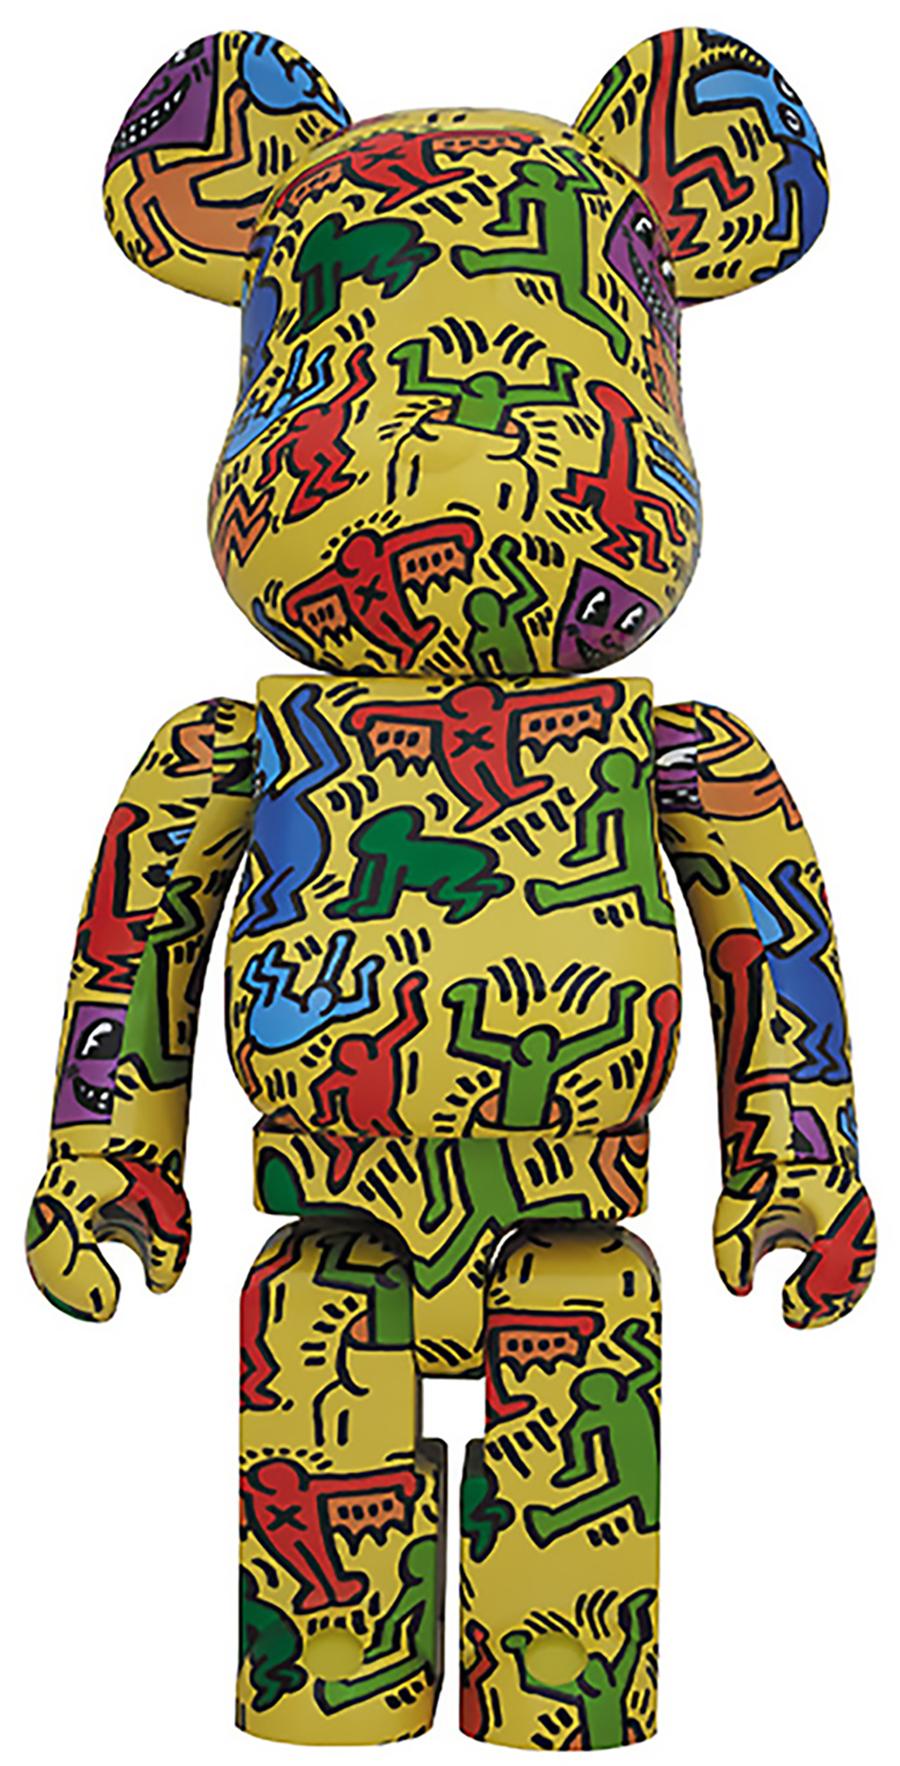 Keith Haring Bearbrick 400% Figures: Set of 4 works (c.2019-2021):
Unique, timeless Keith Haring collectibles, each trademarked & licensed by the artist's estate. The partnered figures reveals the late iconic artist’s 1980s artwork wrapping the